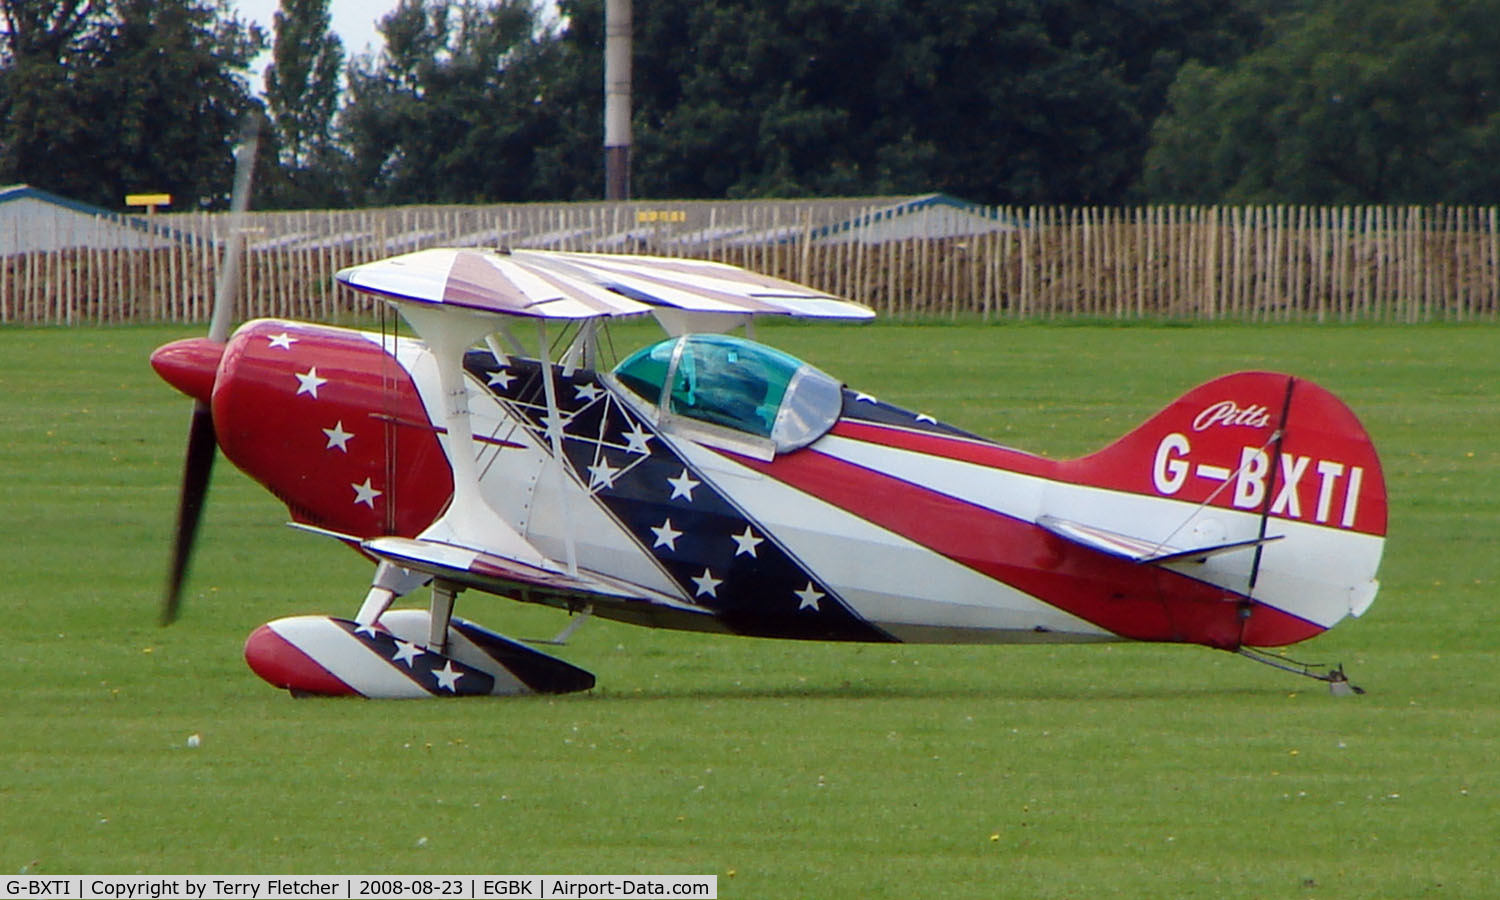 G-BXTI, 1971 Pitts S-1S Special C/N NP1, Visitor to Sywell on 2008 Ragwing Fly-in day